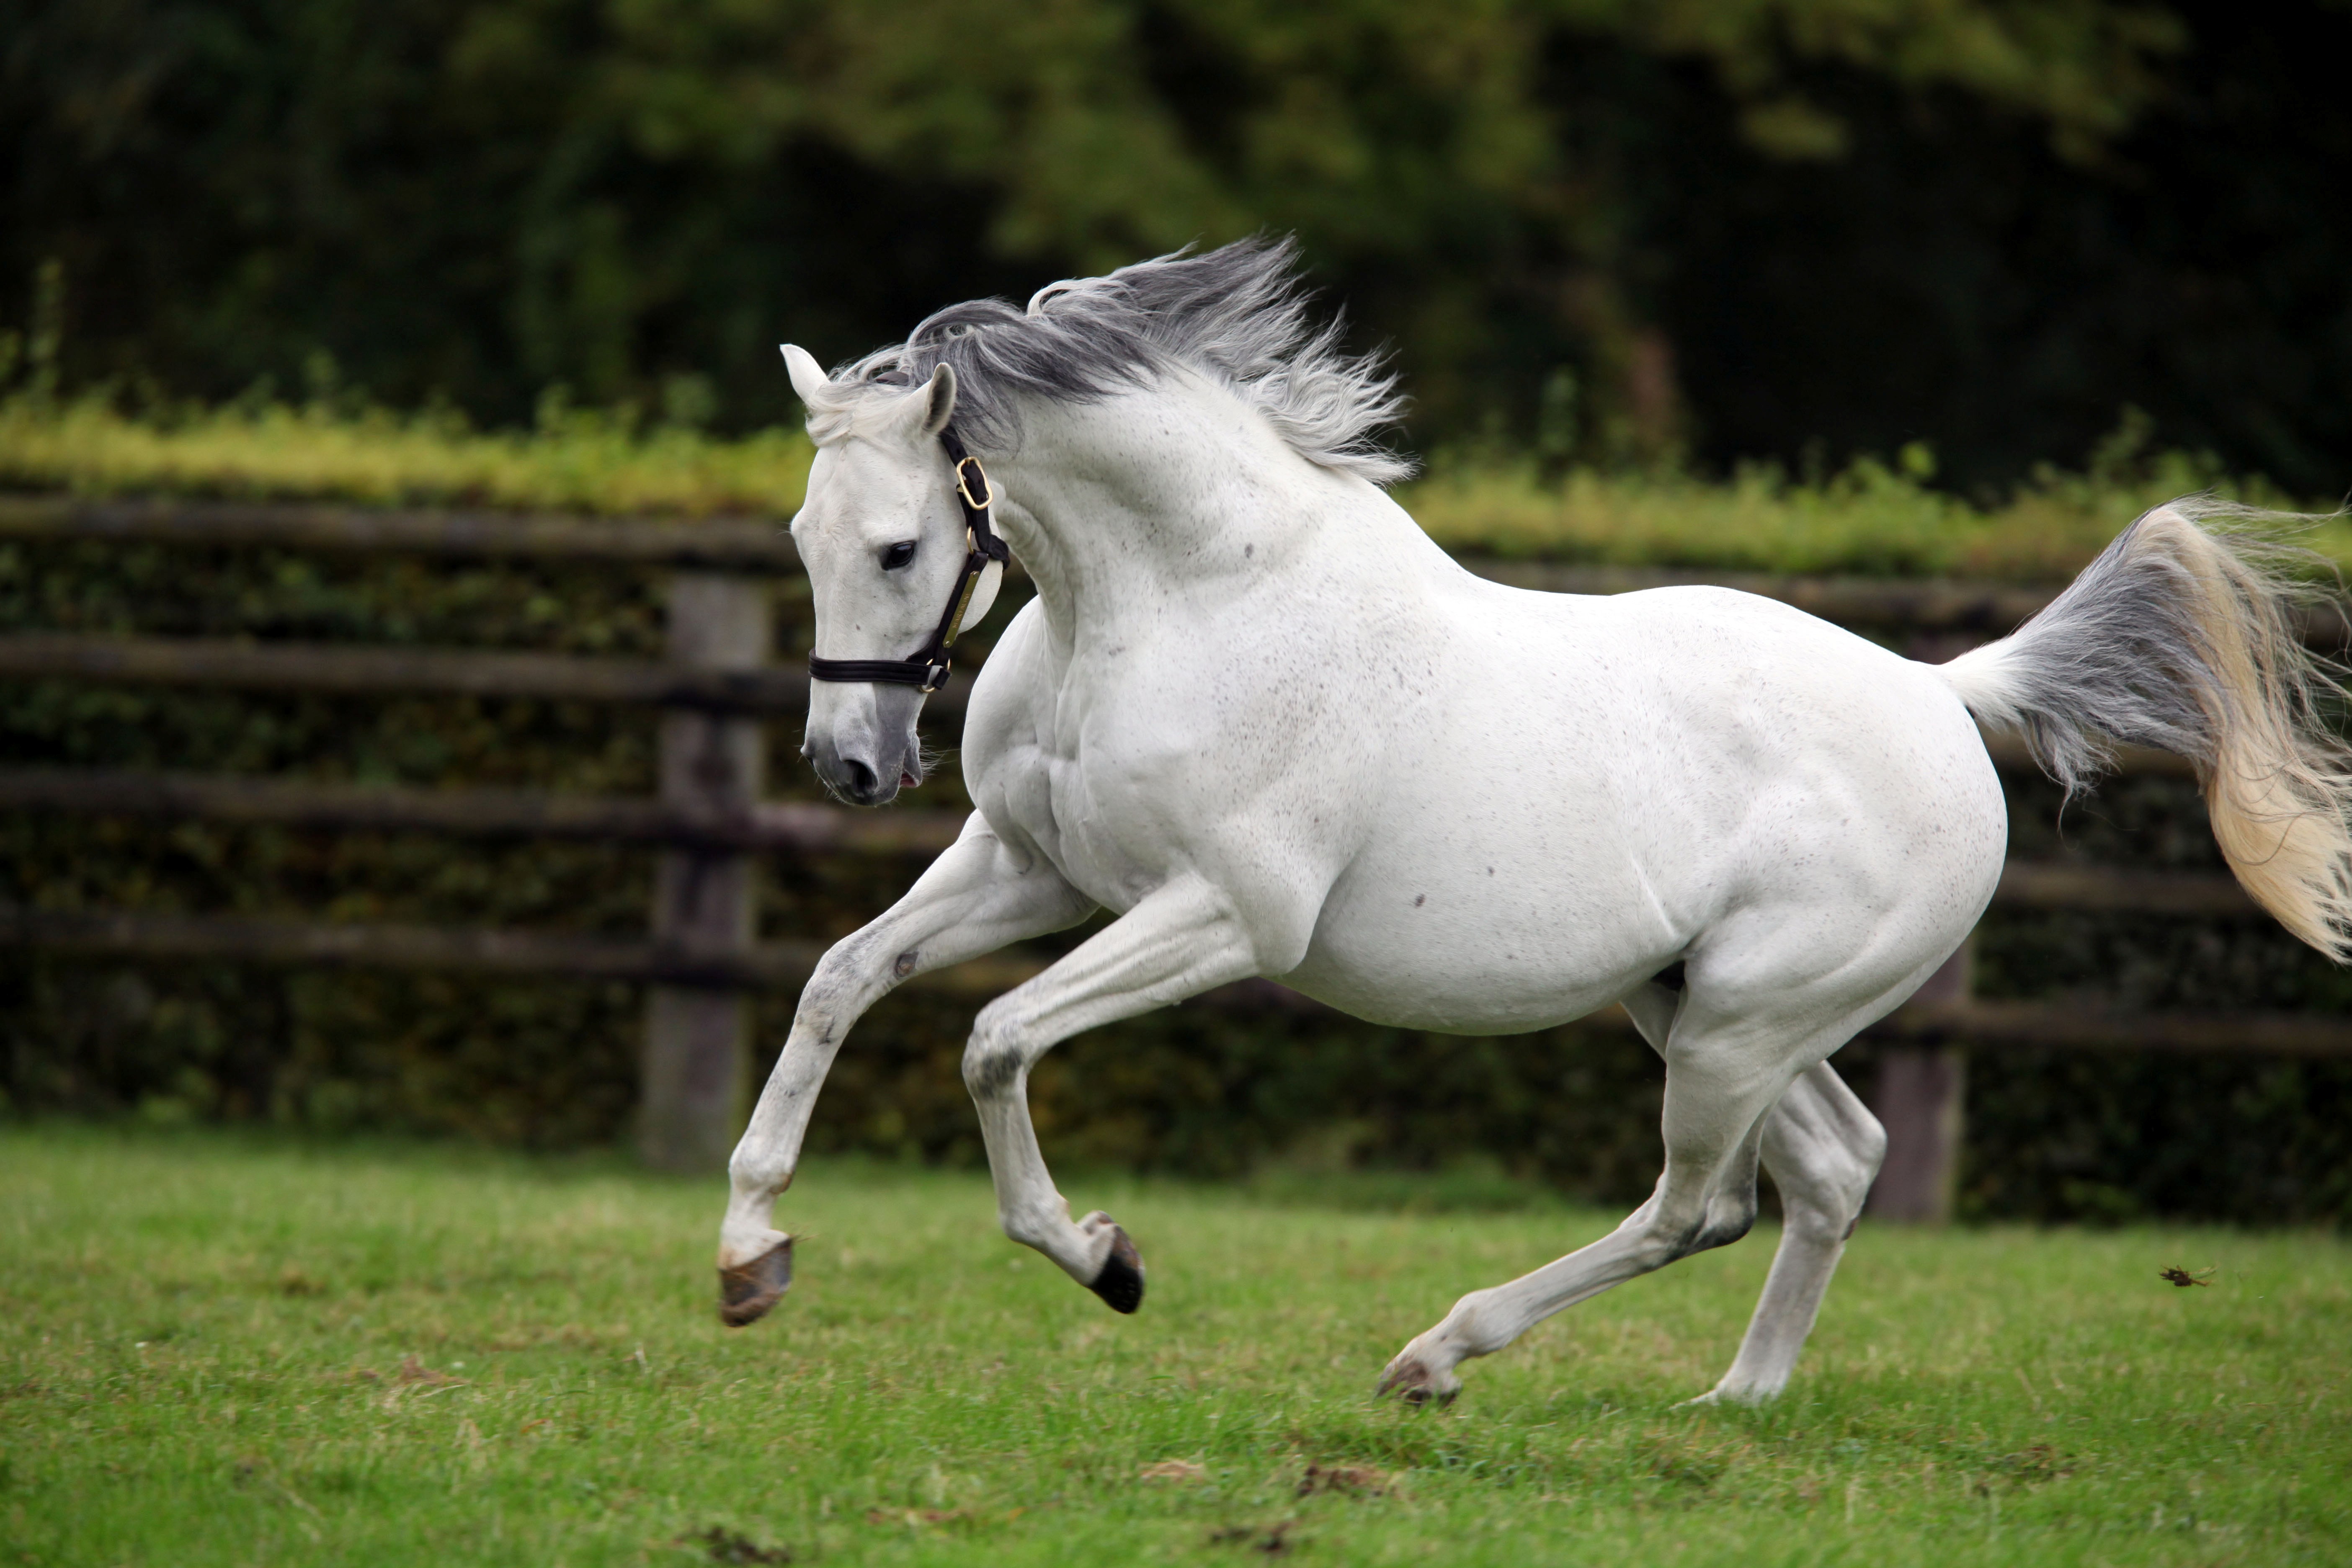 Enjoying his freedom: Martaline was "a very easy sell to breeders because he was so good looking and his pedigree is amazing", says Sybille Gibson. Photo: Haras de Montaigu